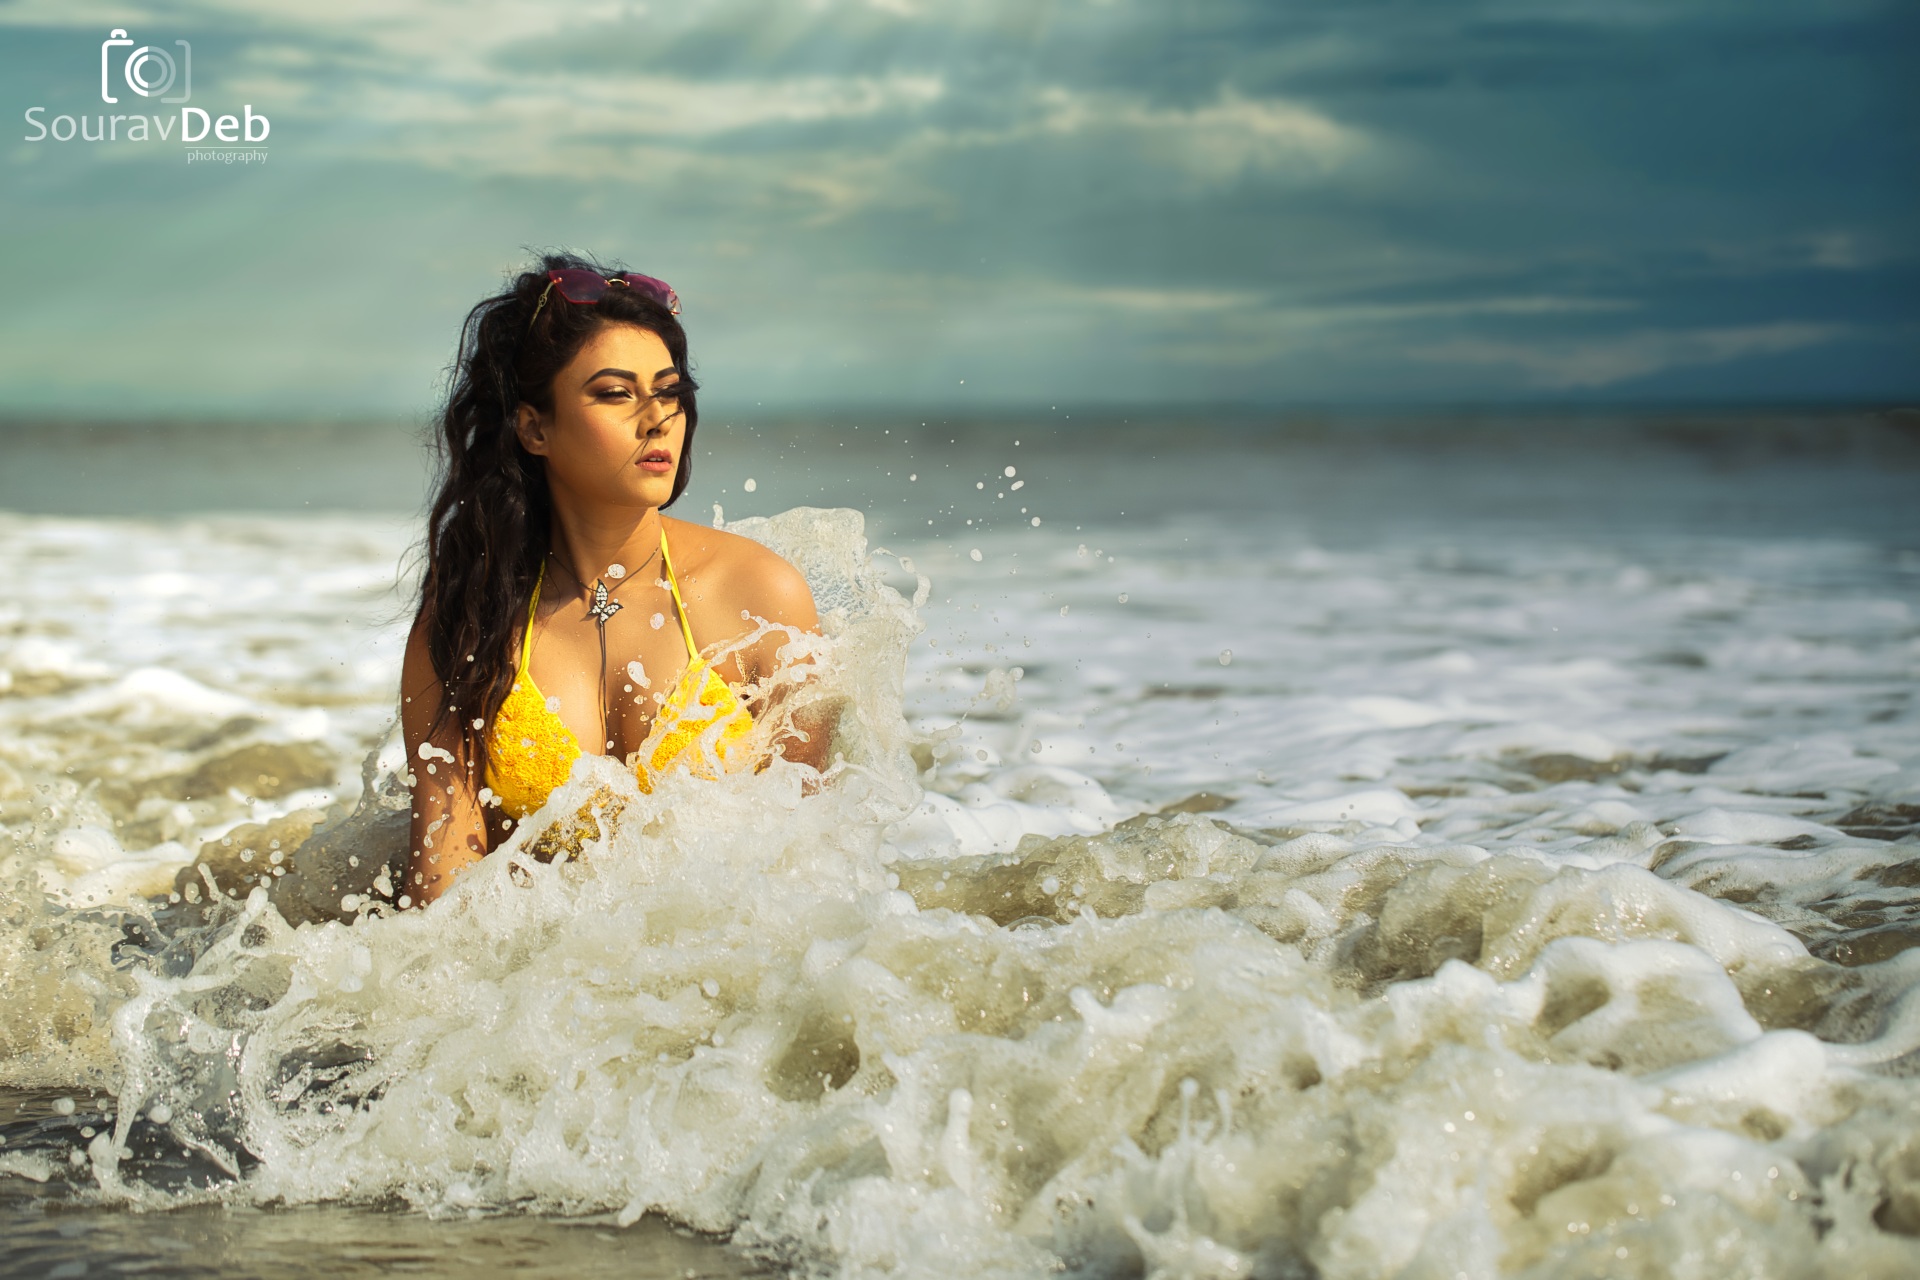 This photograph of model Soumi Das, captured by the talented photographer Sourav Deb for his 2020-21 Swimsuit Calendar, is a captivating portrait of feminine beauty amidst the ocean's embrace. The image features a woman kneeling in the shallows, her yellow bathing suit a vibrant splash against the turquoise water. Sparkling droplets of seawater cascade down her skin, capturing the playful essence of the ocean's spray.The composition draws the viewer's eye to the woman's face, partially turned towards her left. Sunlight bathes her features, creating a striking Rembrandt shadow that adds depth and dimension to the image. Above the waterline, the bikini top and a glimpse of her shoulder emerge, further emphasizing the feminine form.Sourav Deb's masterful use of high dynamic range (HDR) photography enhances the image's visual impact. The vibrant colors of the ocean and the woman's swimsuit stand in stark contrast to the deep shadows, creating a sense of drama and intrigue. The overall effect is a stunning and captivating portrait that celebrates both the beauty of the female form and the power of the natural world.